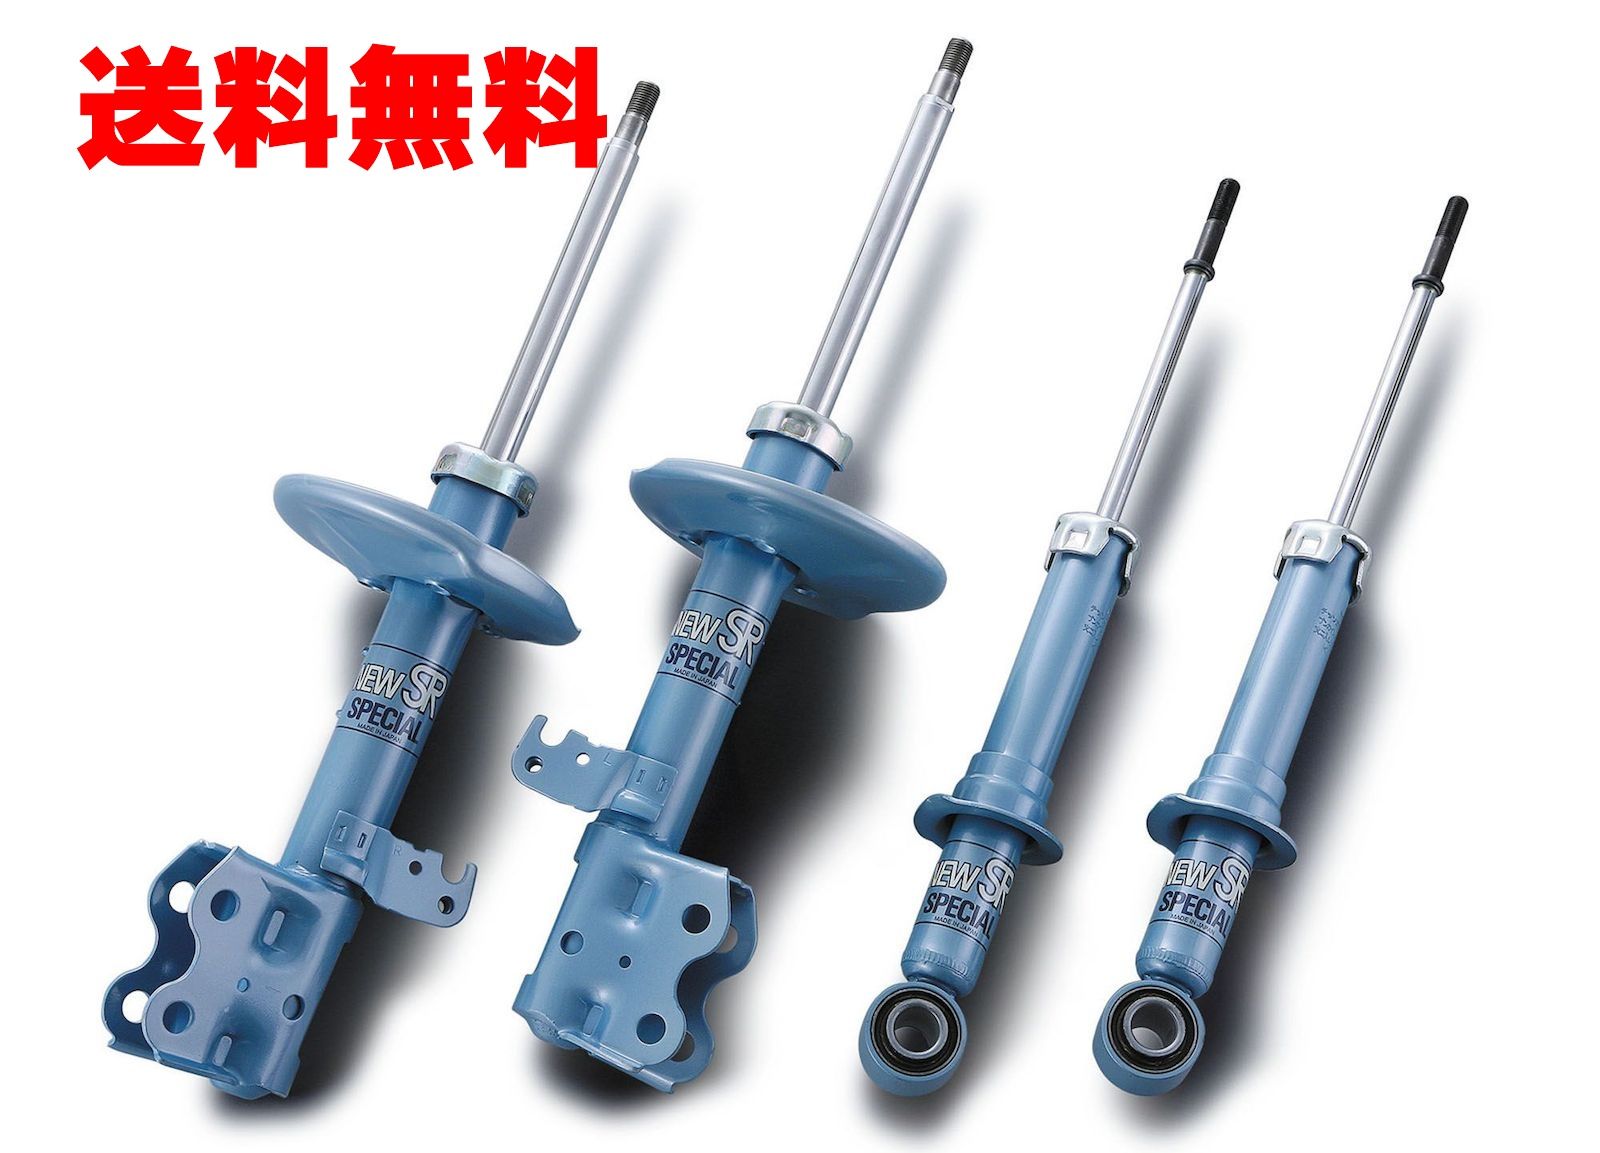 KYB( KYB ) shock absorber NewSR SPECIAL for 1 vehicle set Suzuki Lapin HE21S 04/10-08/10 product number :NS-53071042